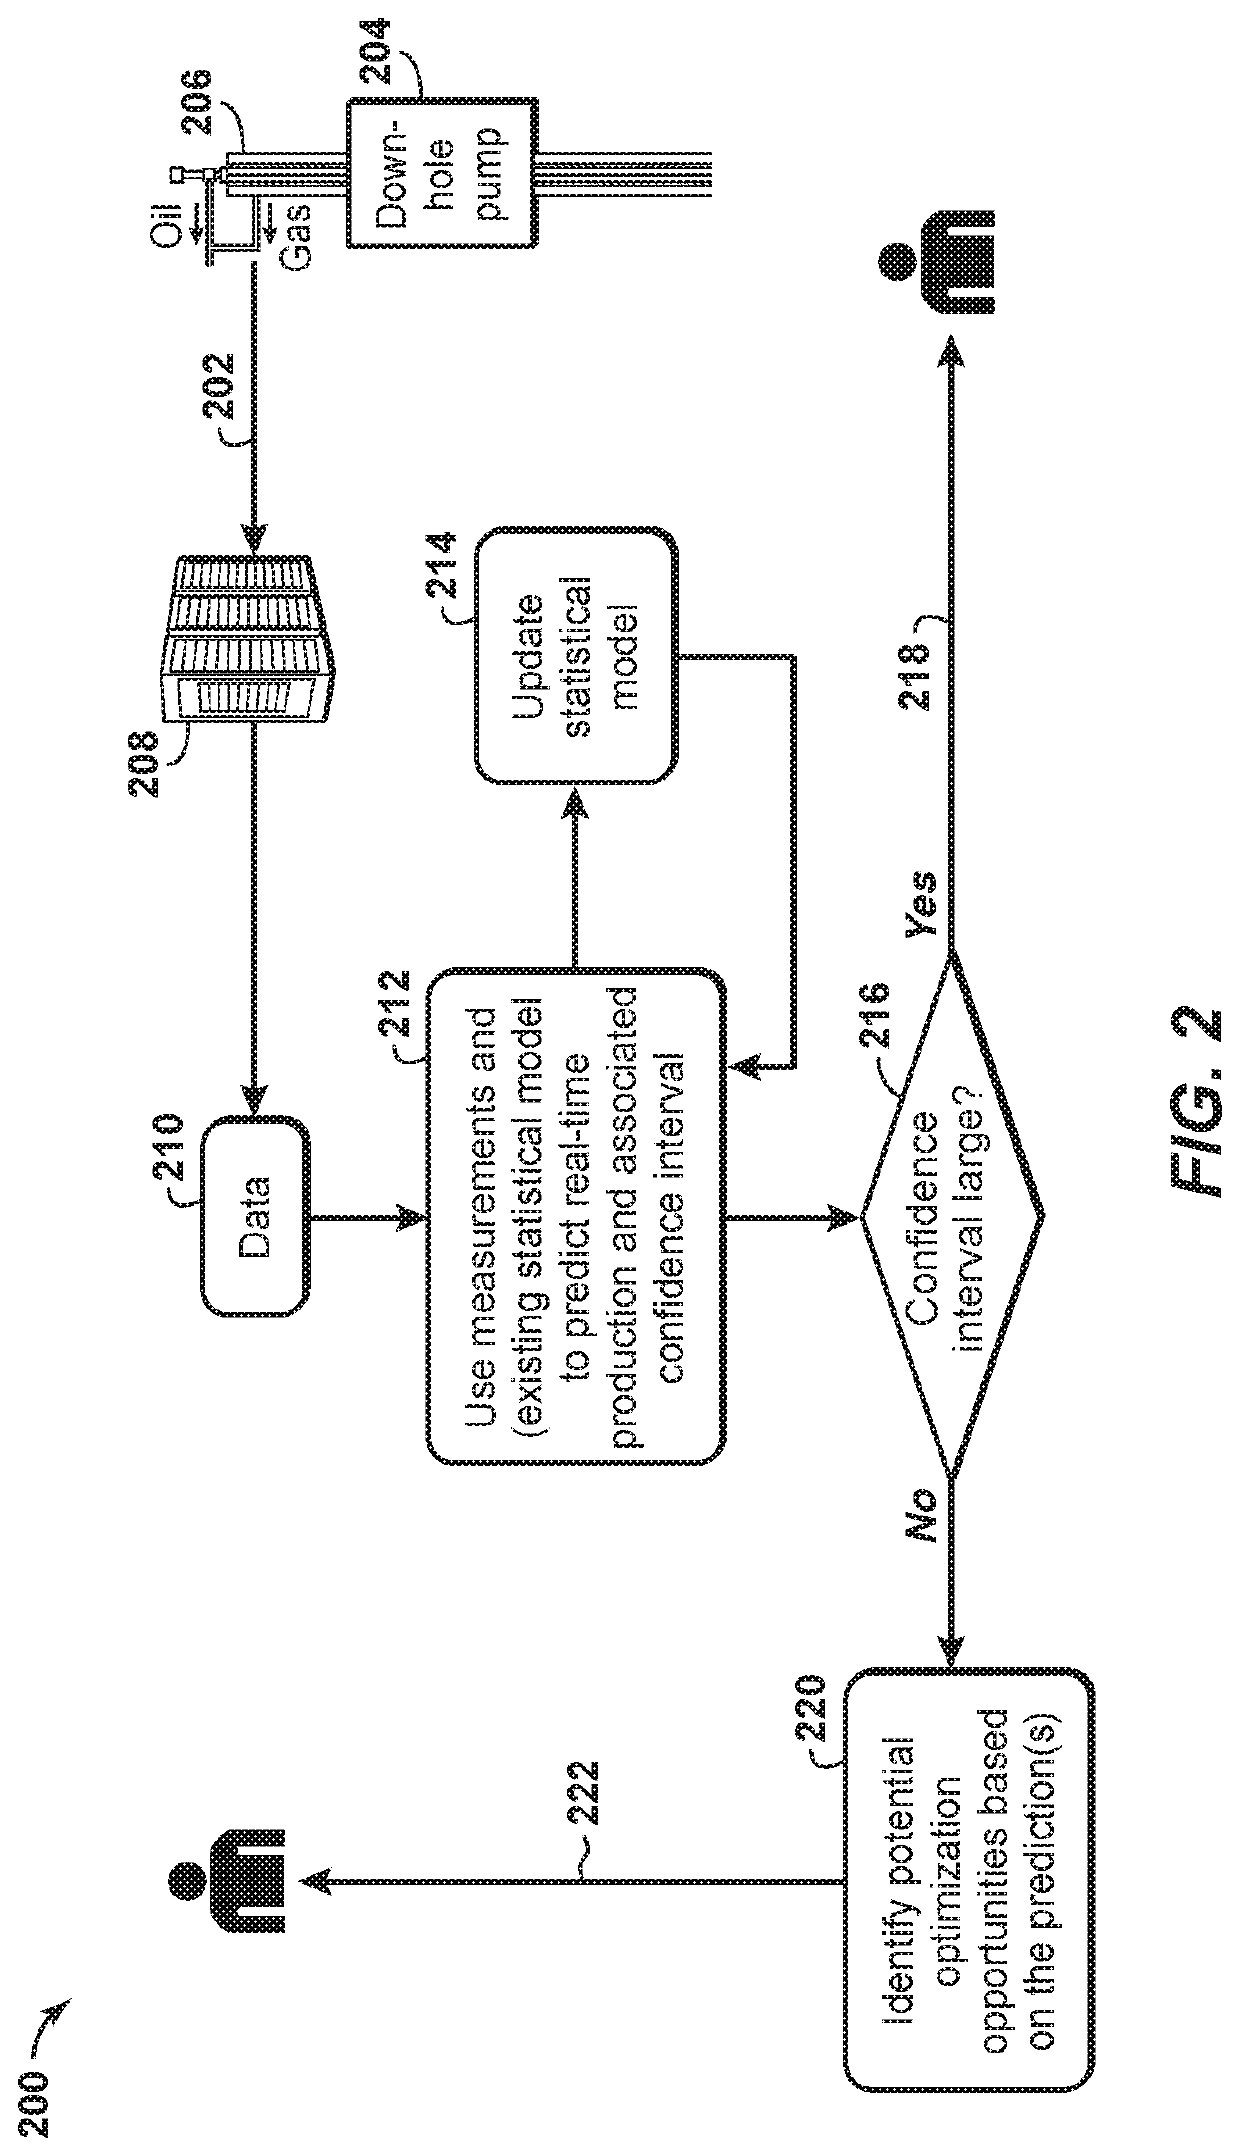 Method and System of Producing Hydrocarbons Using Physics-Based Data-Driven Inferred Production